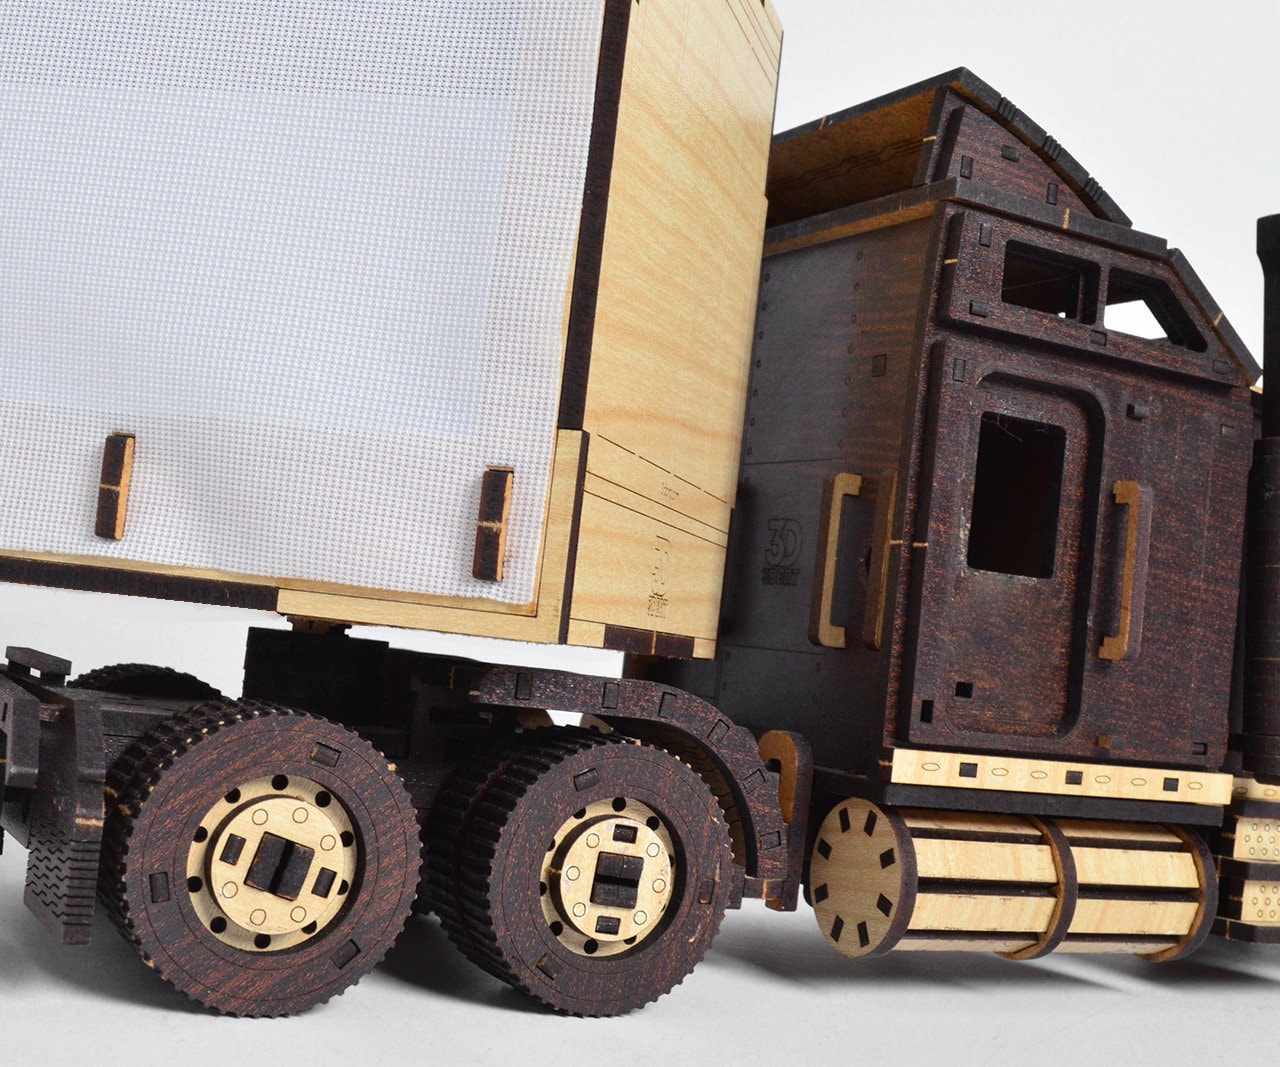 Wood Truck With Semitrailer Tent 3DBRT/ Wood Constructor Kit